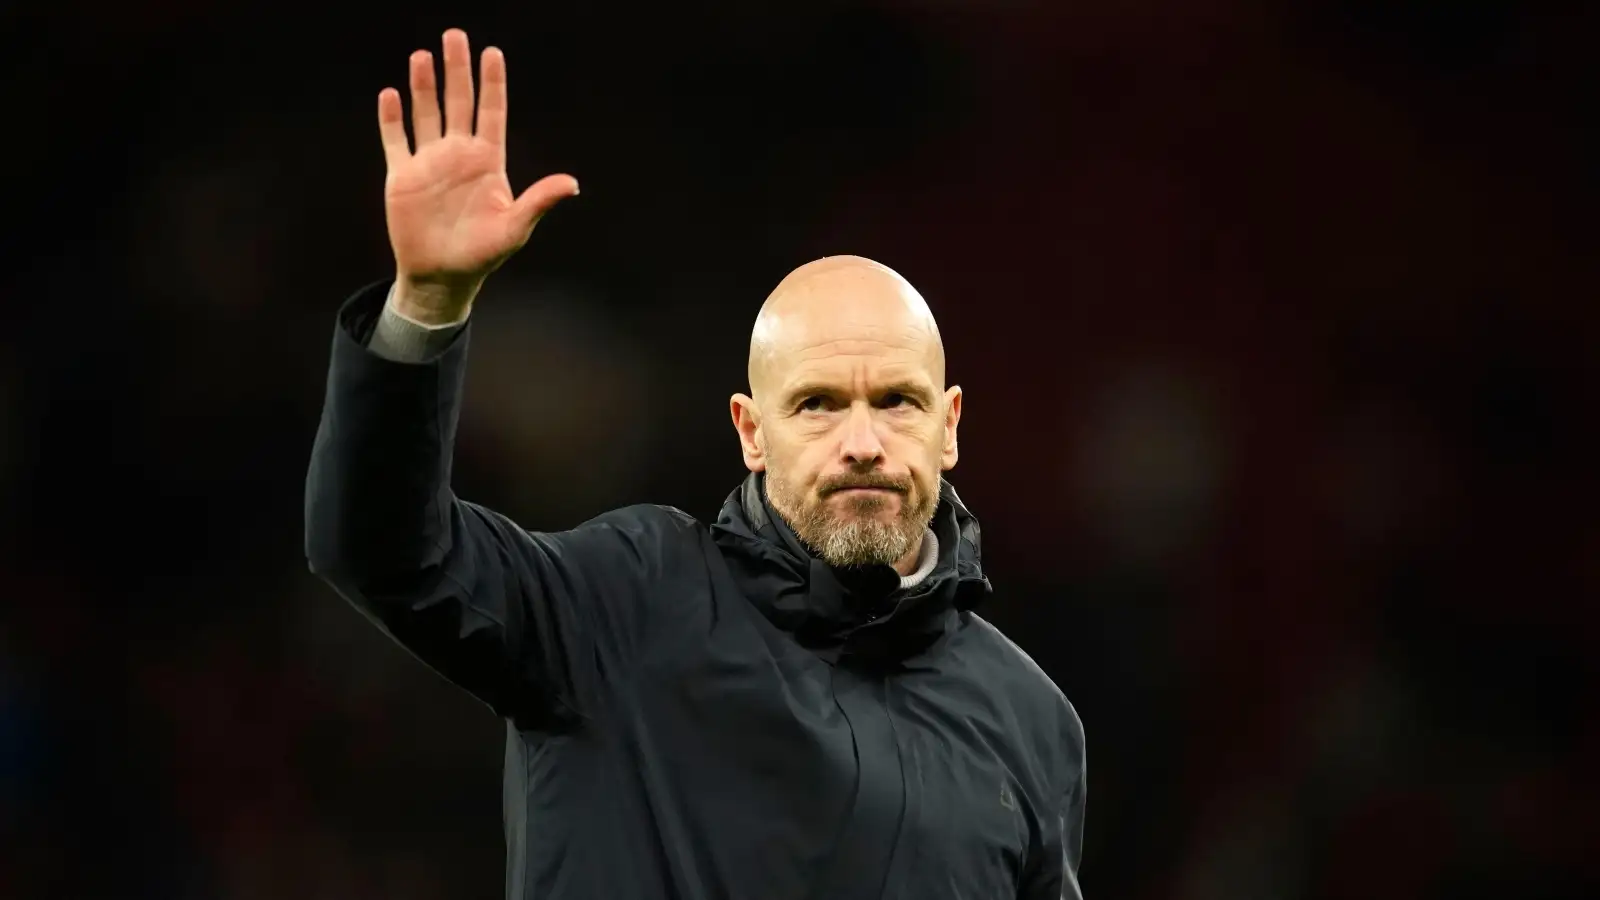 Man Utd transfers: Ten Hag puts defender up for sale at ‘almost free’ value as leading suitors emerge